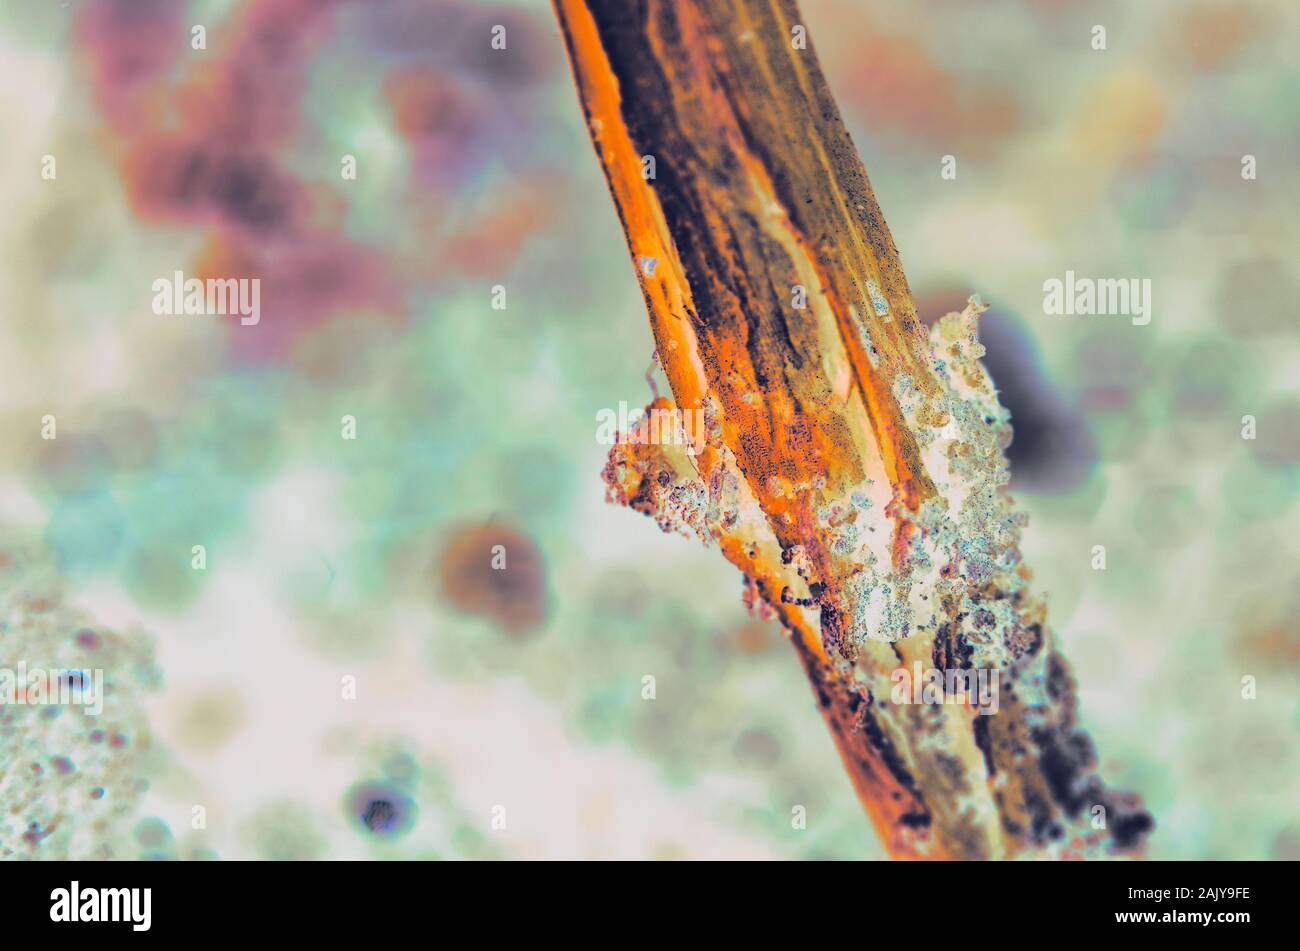 Dead dry coffee plant stem abstract. Grains of soil on stem. Very shallow depth of field. Abstract microscopic like processing Stock Photo